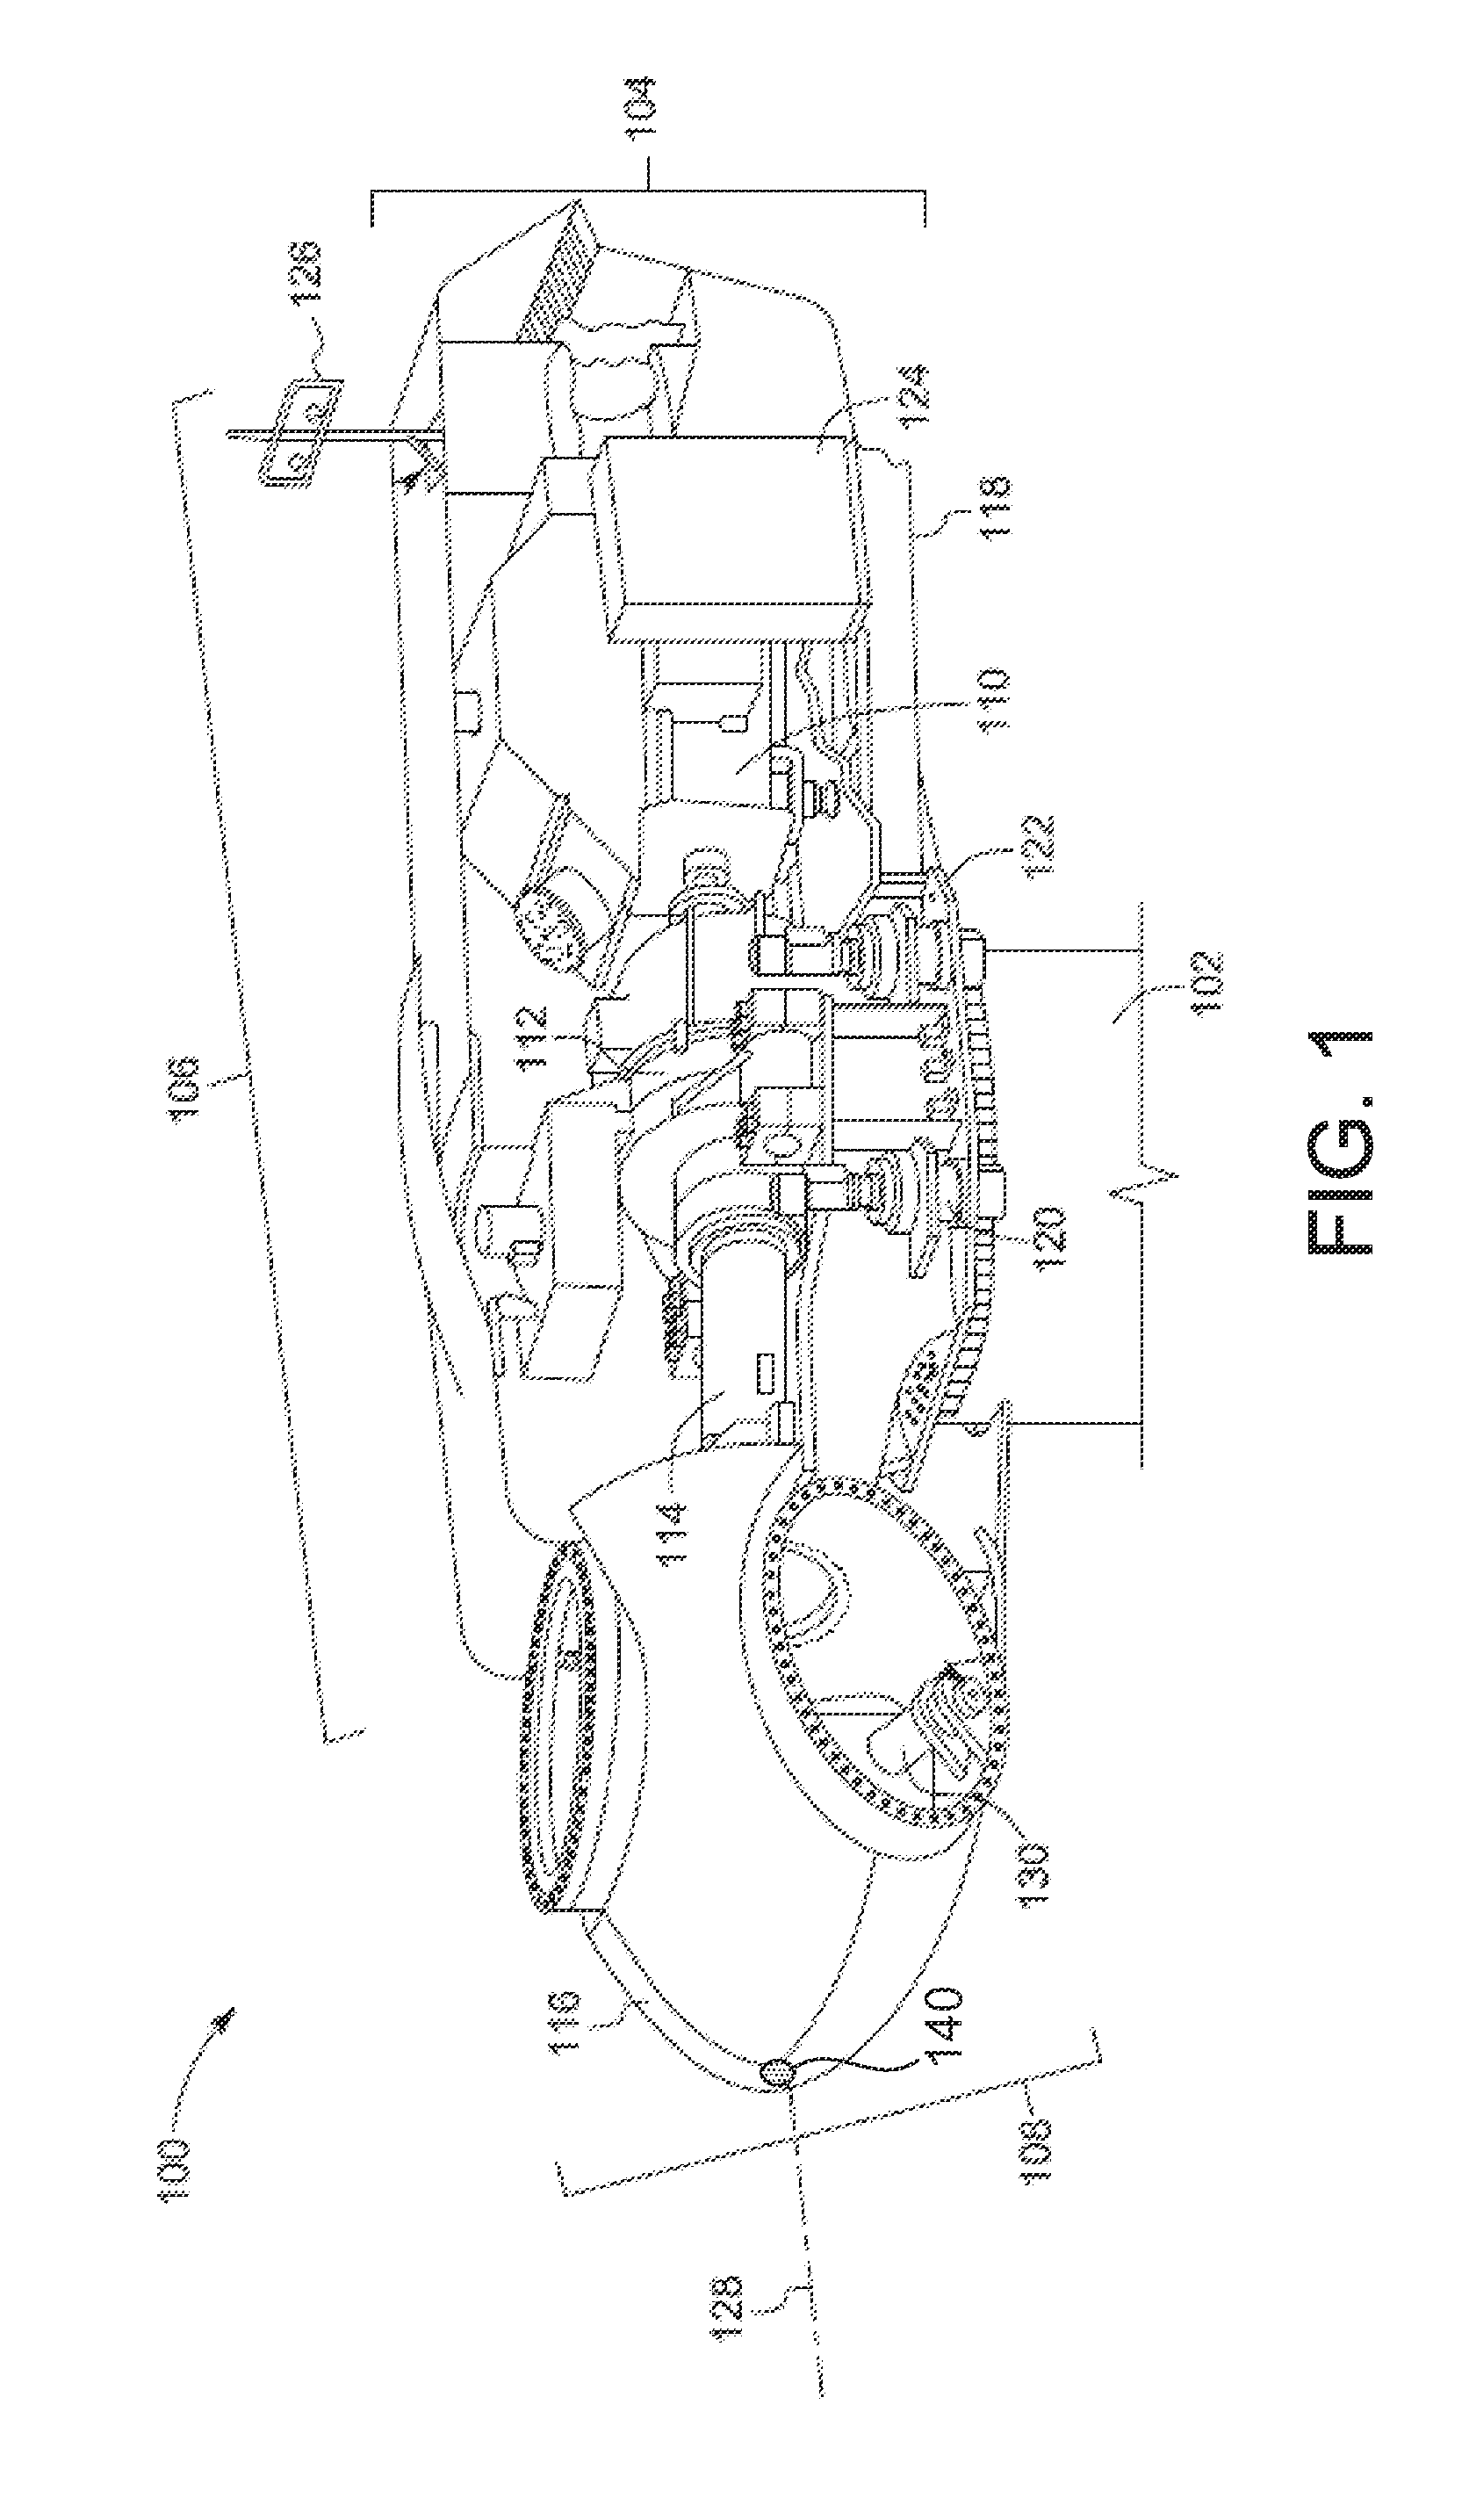 System and method for adaptive rotor imbalance control